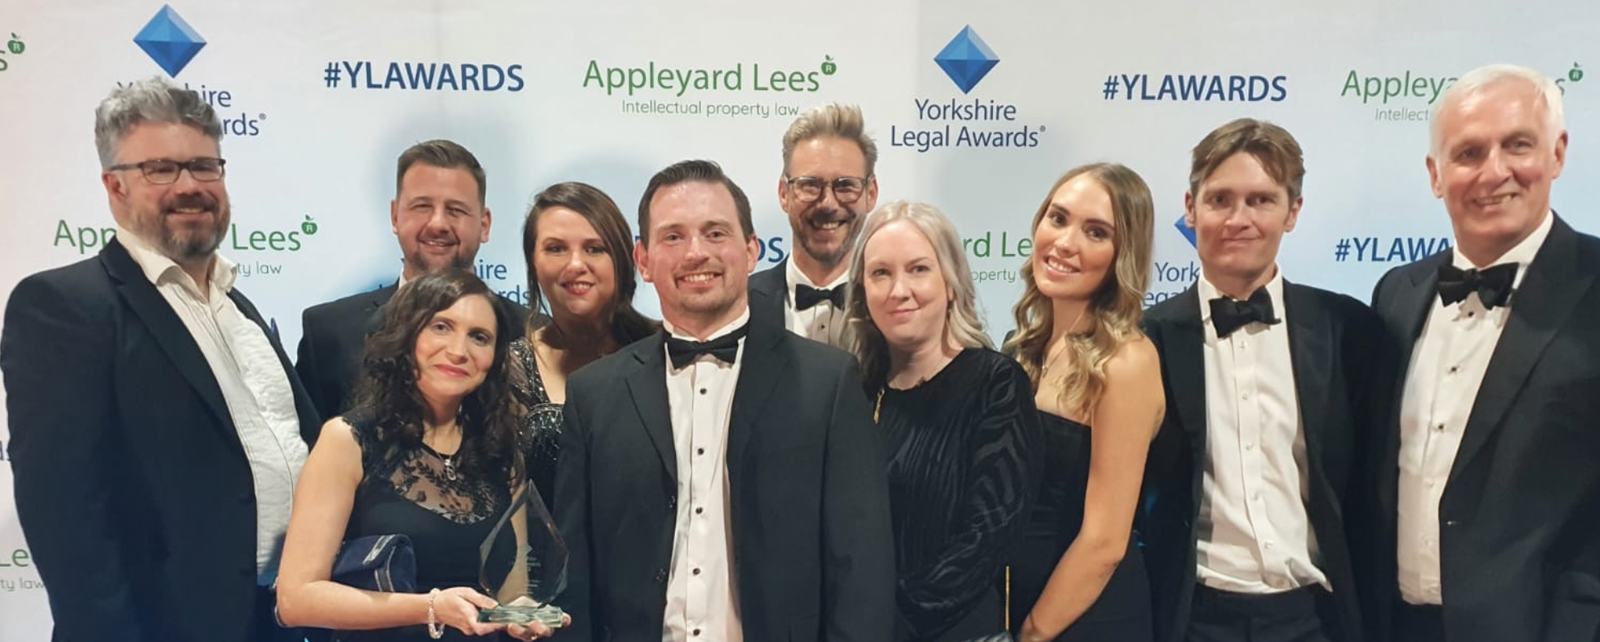 Law firm lands prestigious industry accolade